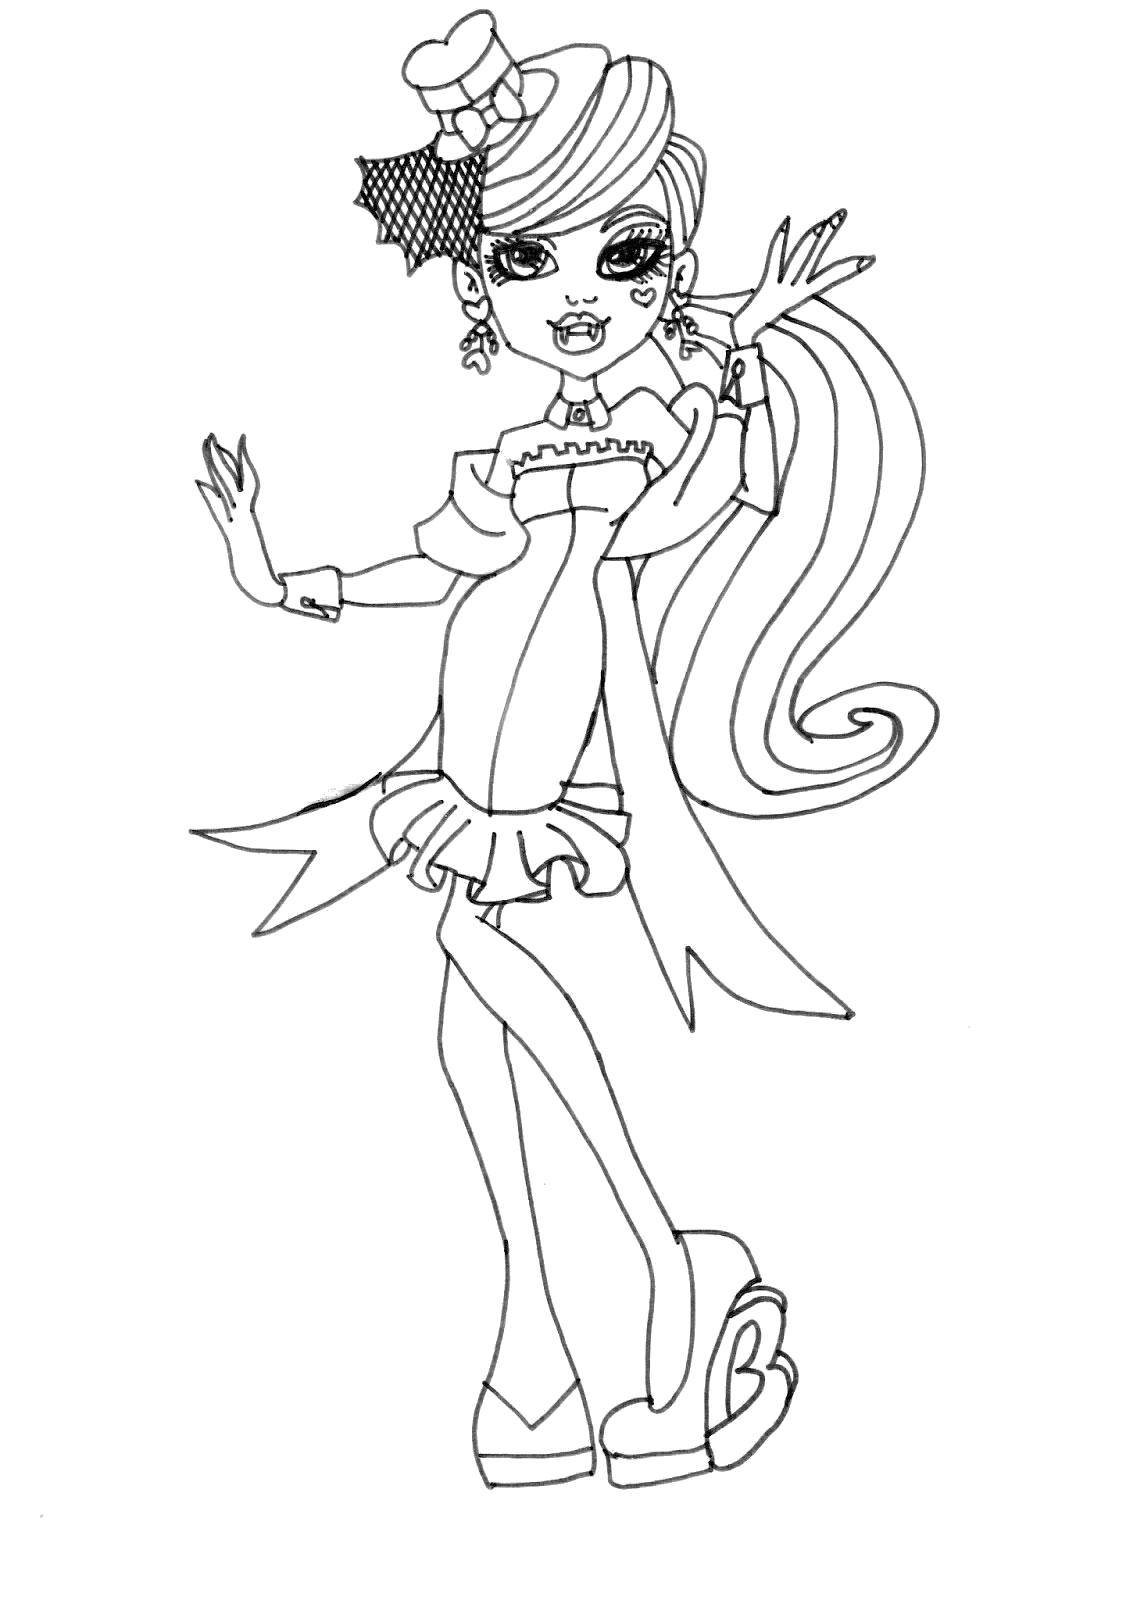 Coloring Playful student. Category monster high. Tags:  Monster High.